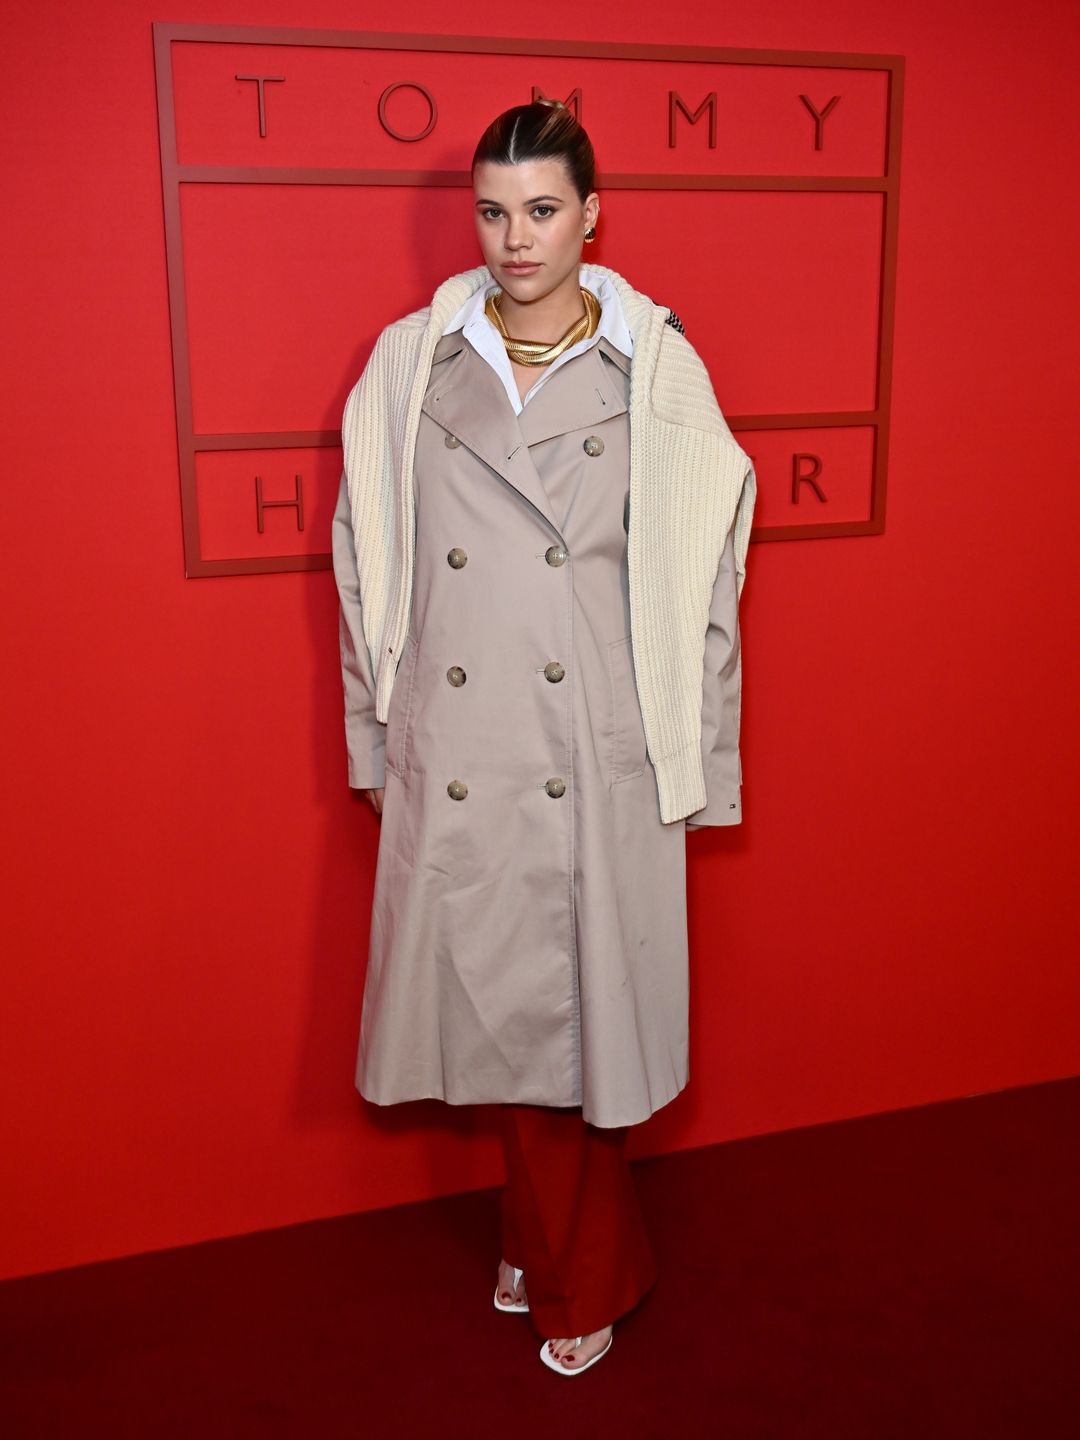  Sofia Richie attends the Tommy Hilfiger show during New York Fashion Week wearing a trench coat and red trousers 